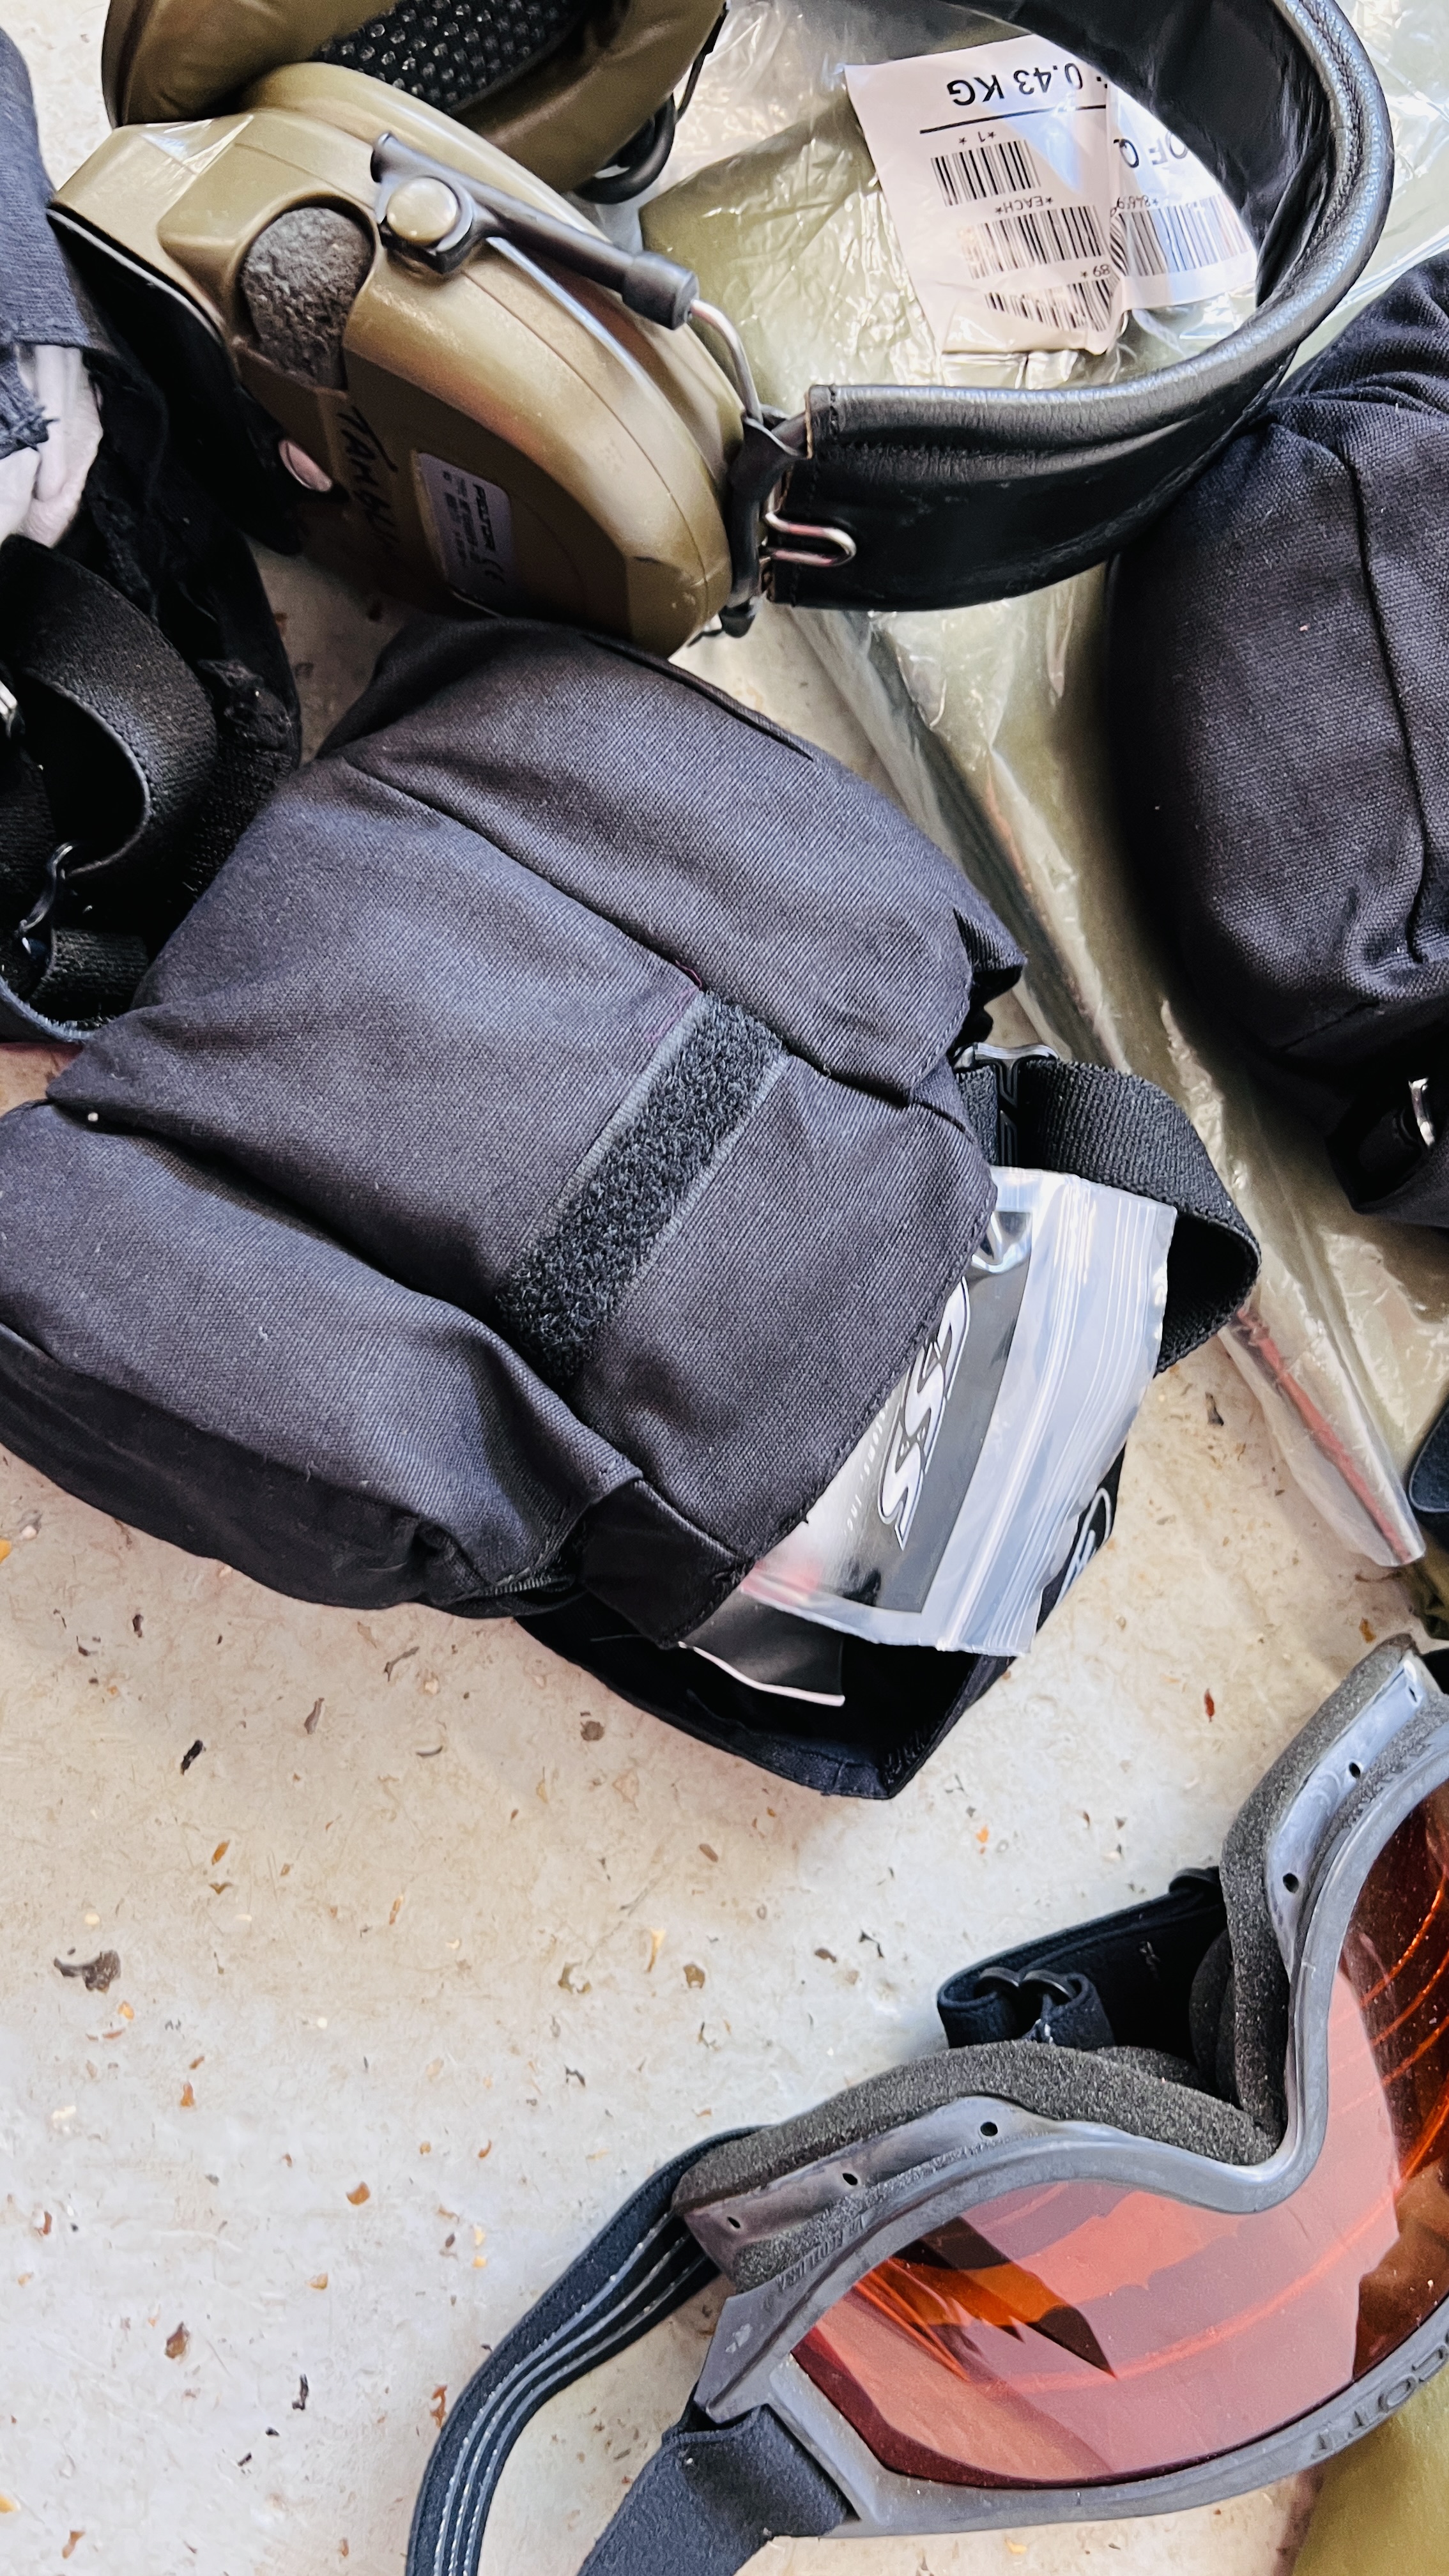 7 X KIT BAGS CONTAINING AN EXTENSIVE GROUP OF TACTICAL ARMY CLOTHING, BACK PACKS, - Image 9 of 24